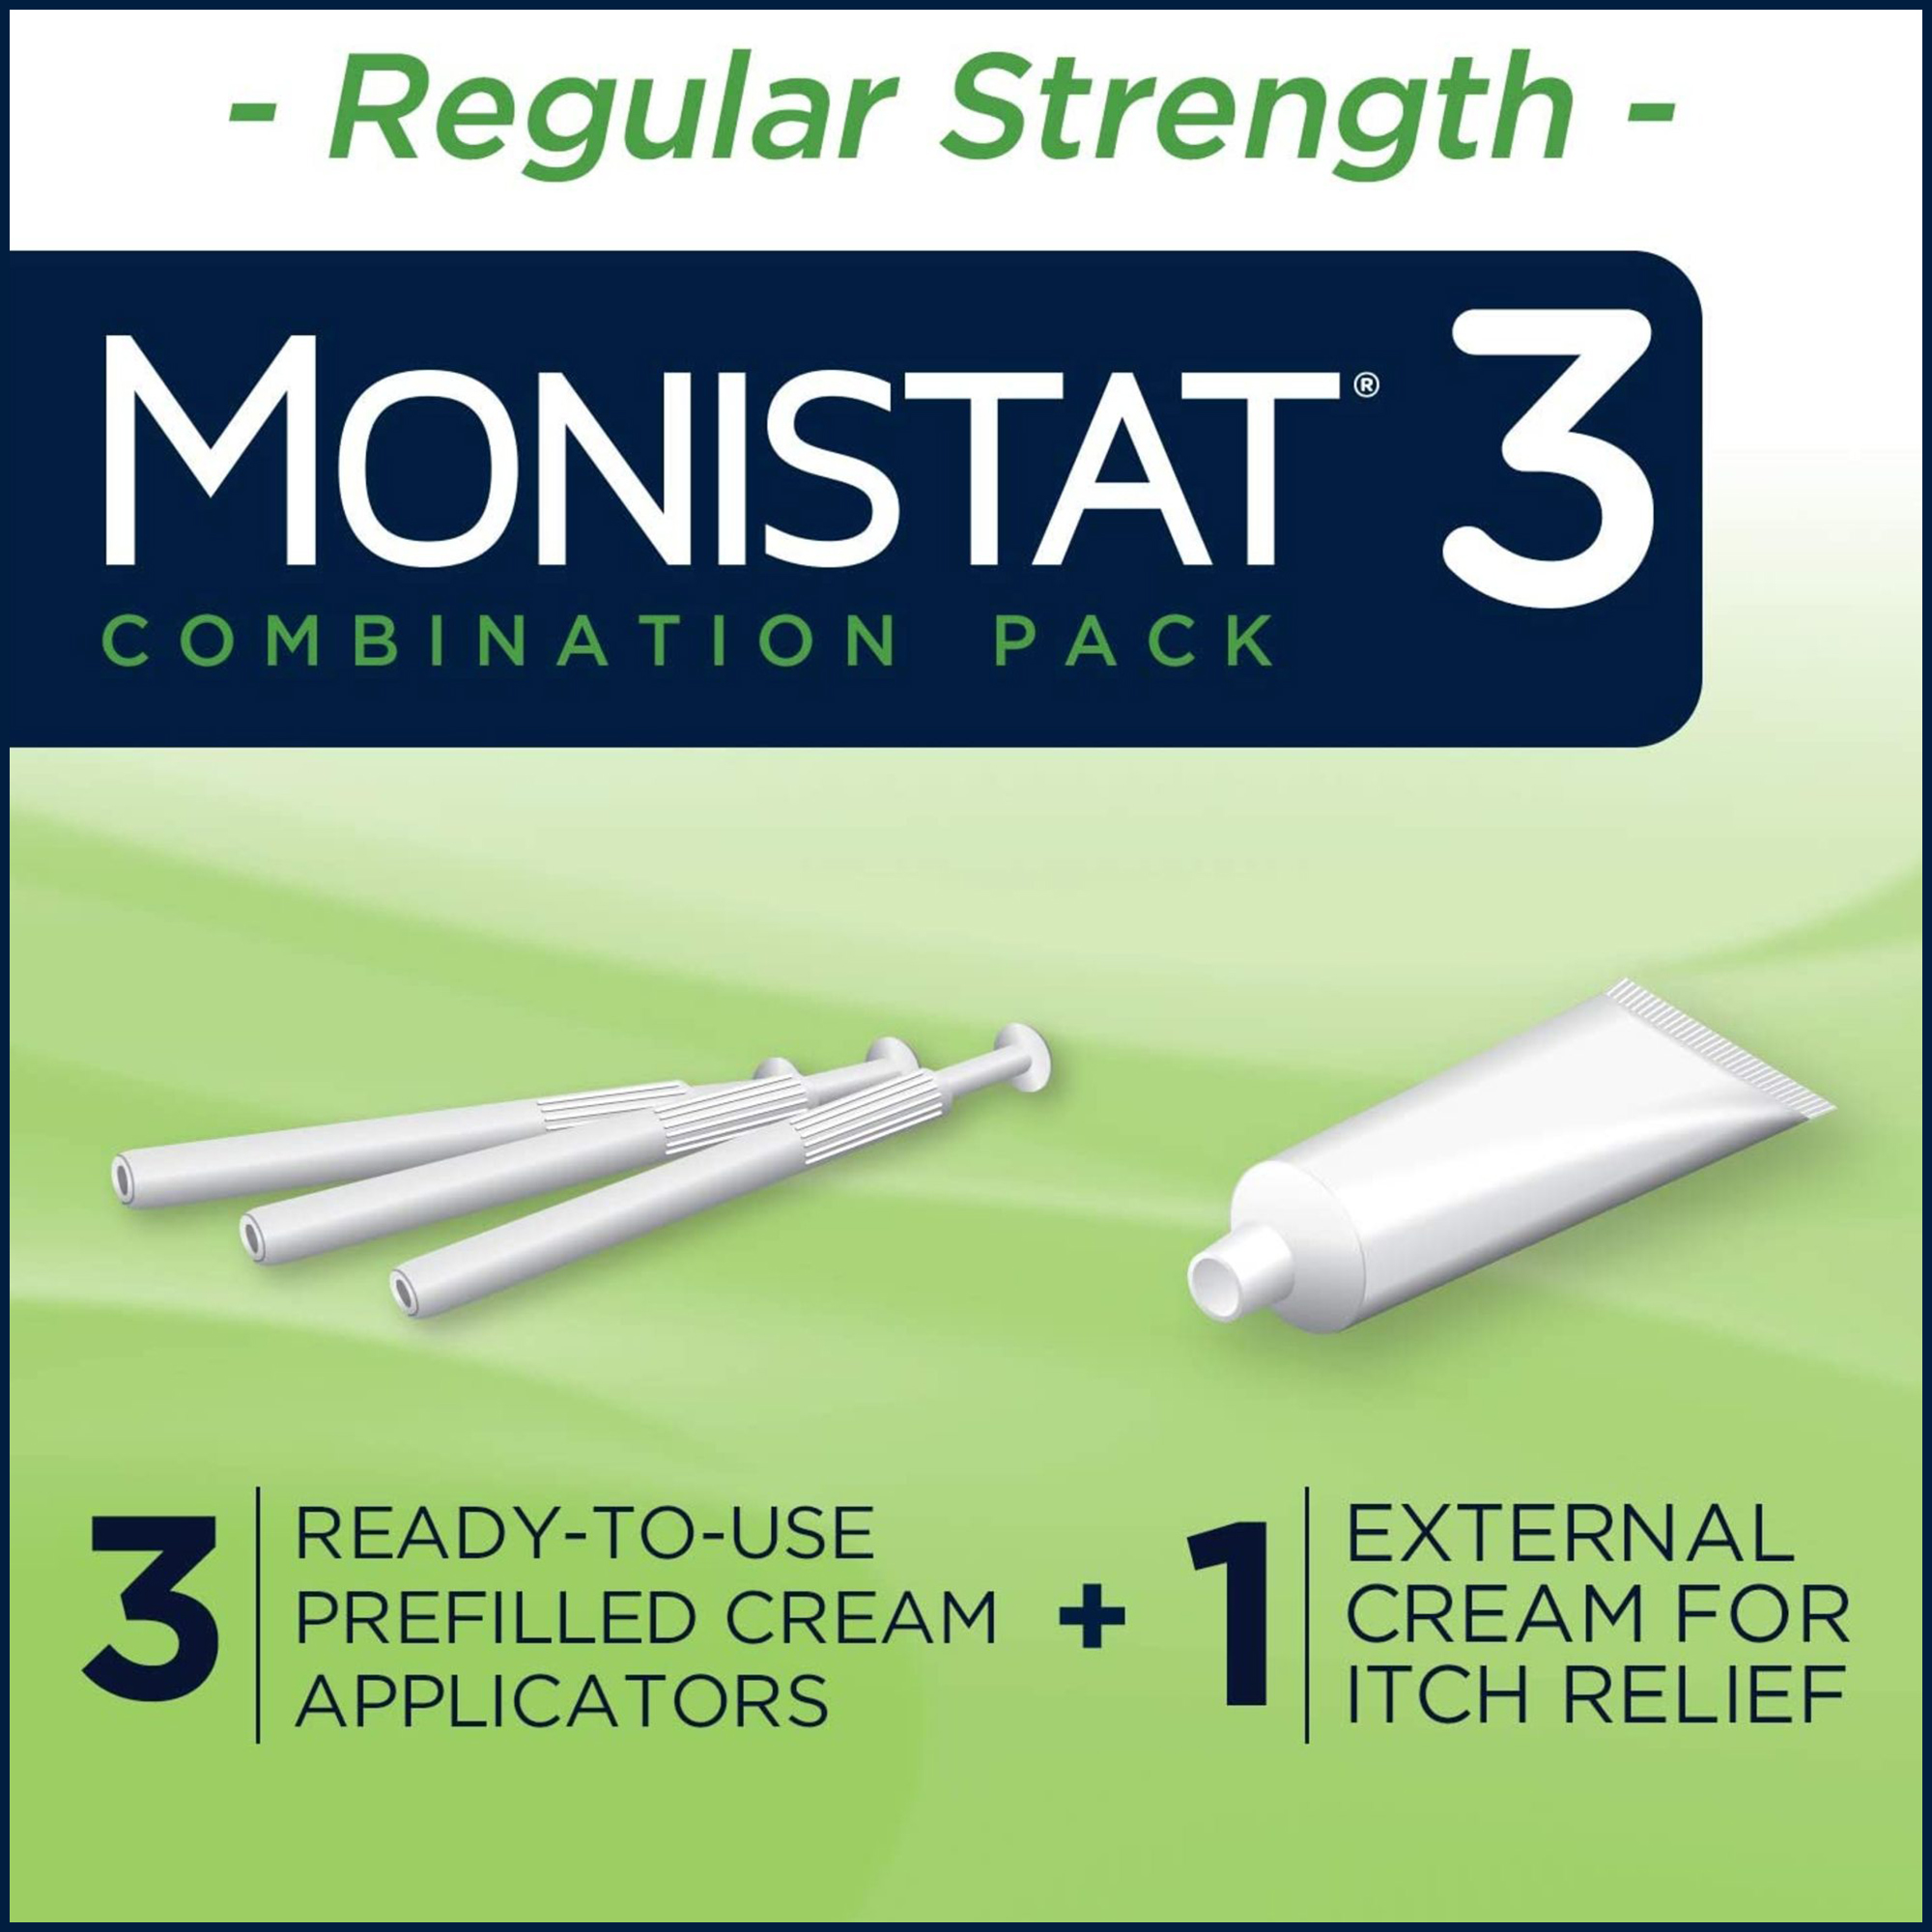 Monistat 3 Day Yeast Infection Treatment, 3 Miconazole Pre-Filled Cream Tubes & External Itch Cream - image 2 of 16